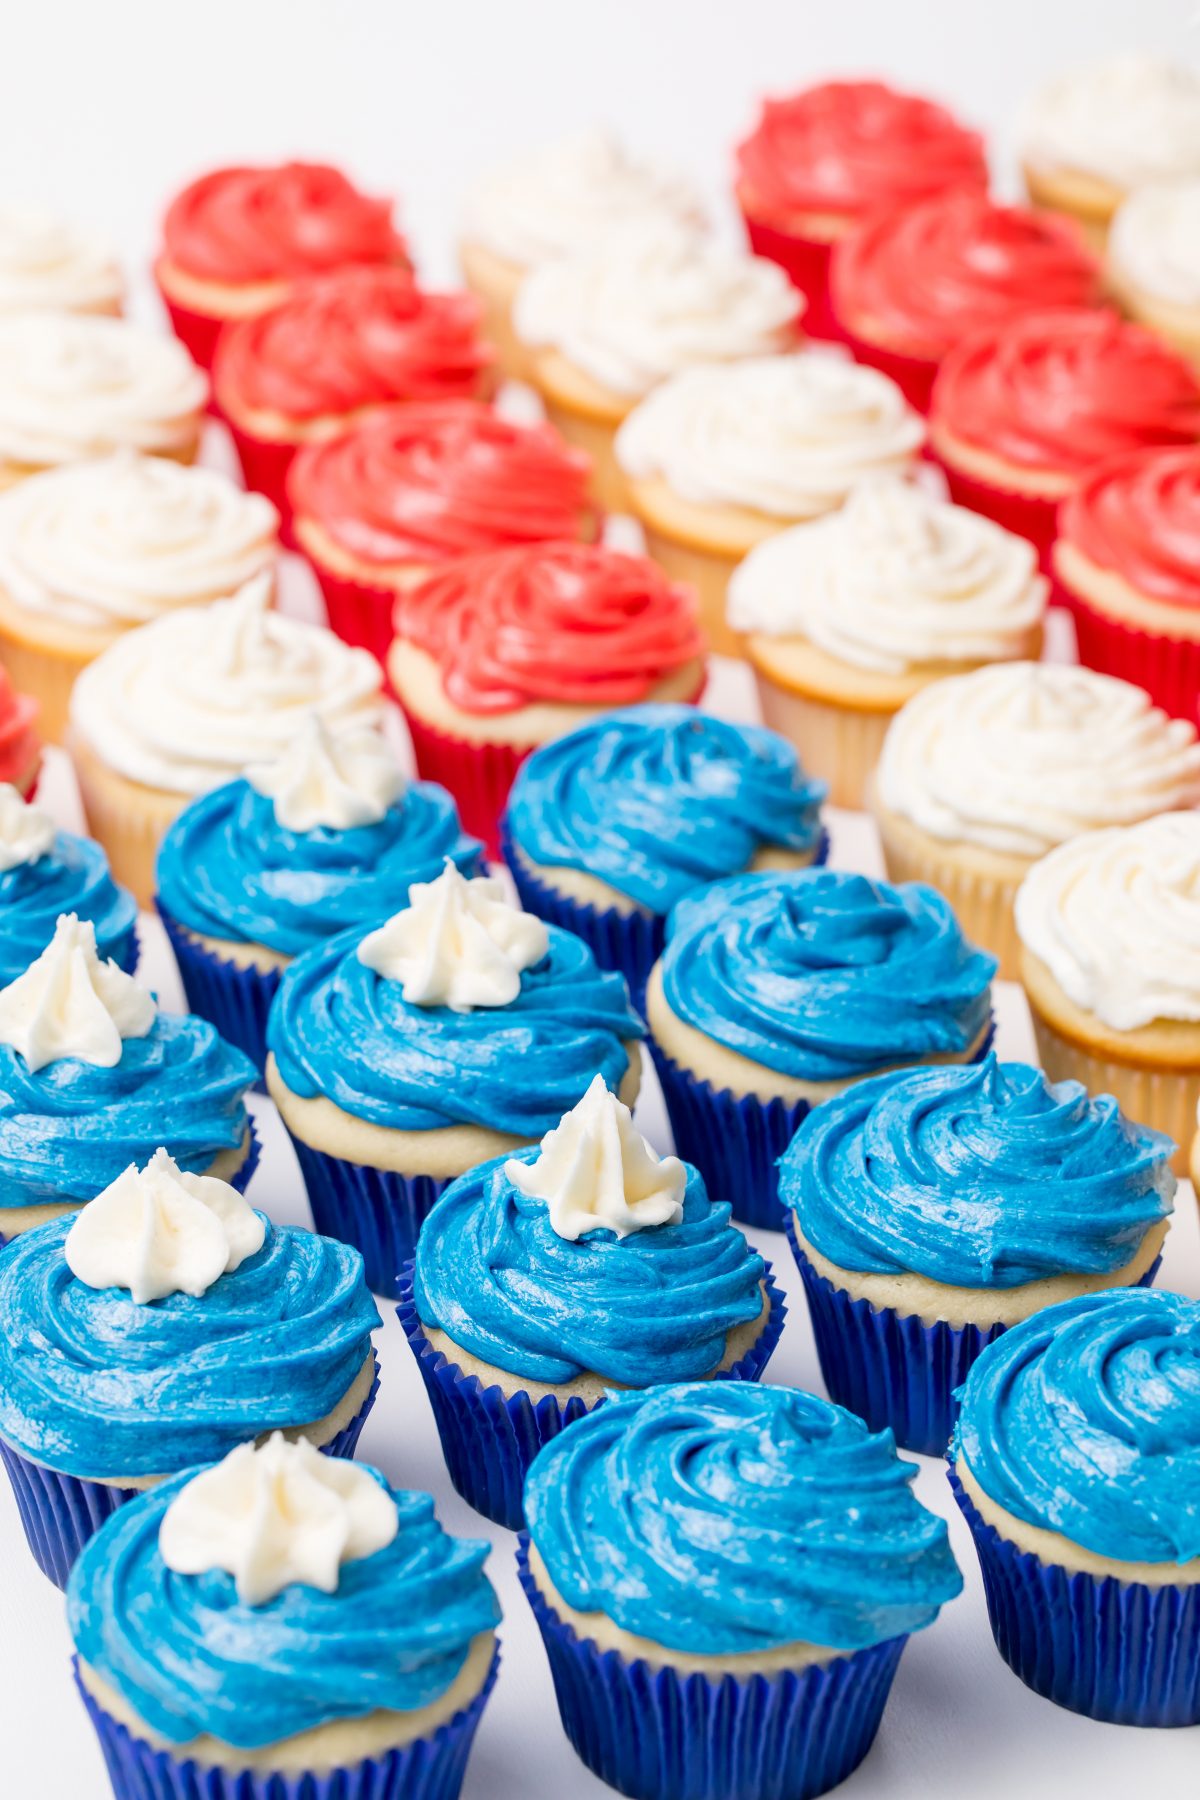 How beautiful and festive are these American flag cupcakes?